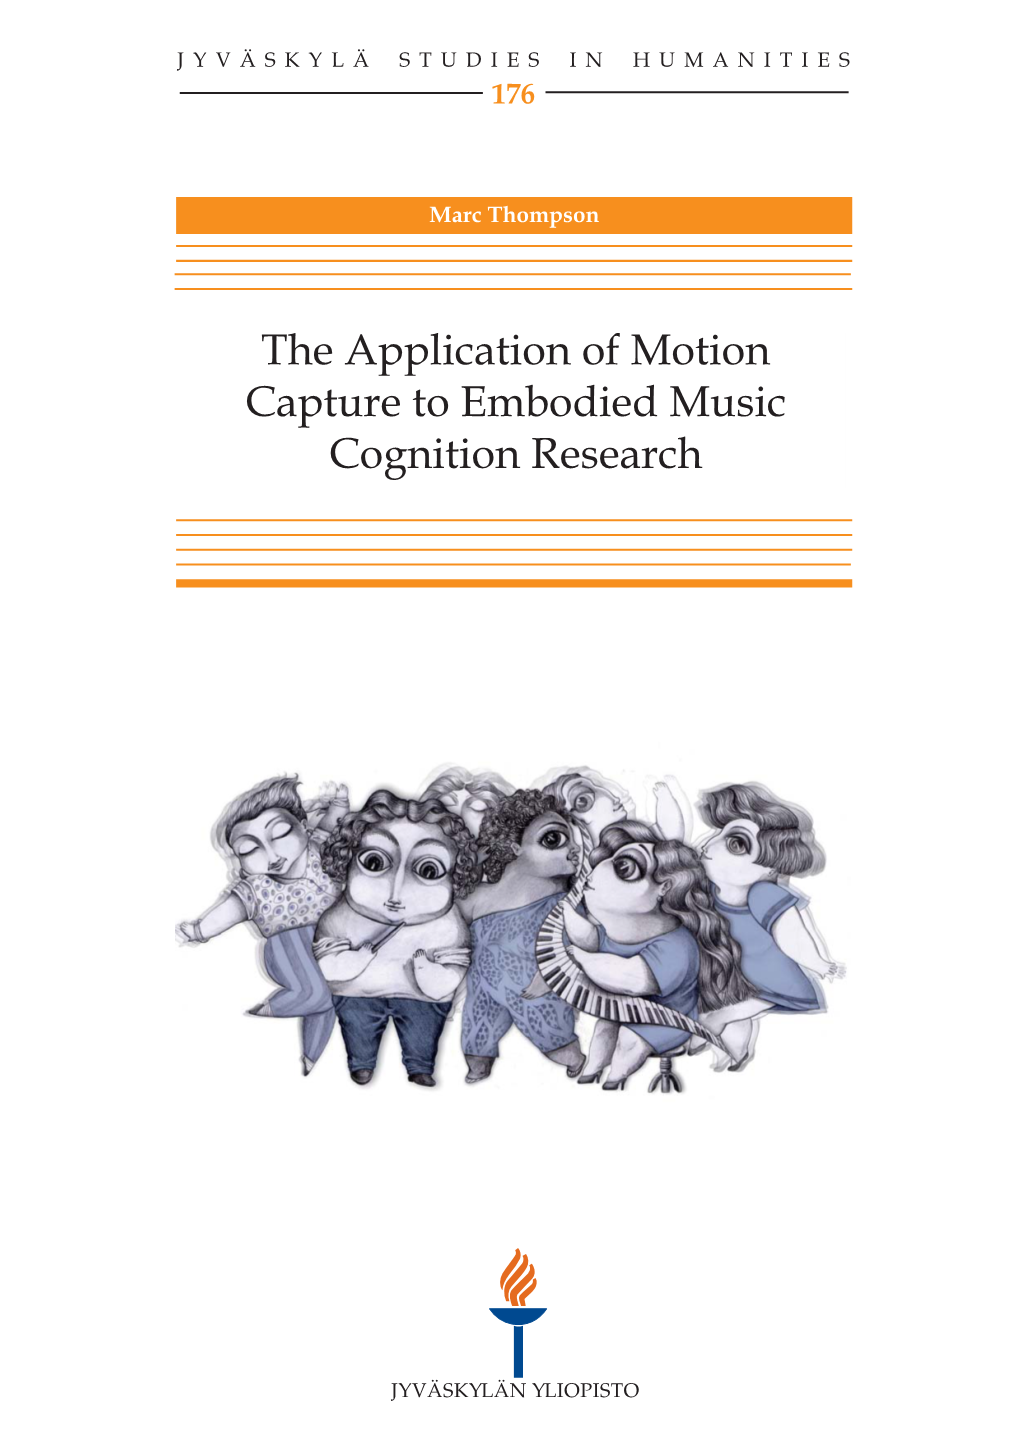 He Application of Motion Capture to Embodied Music Cognition Research JYVÄSKYLÄ STUDIES in HUMANITIES 176